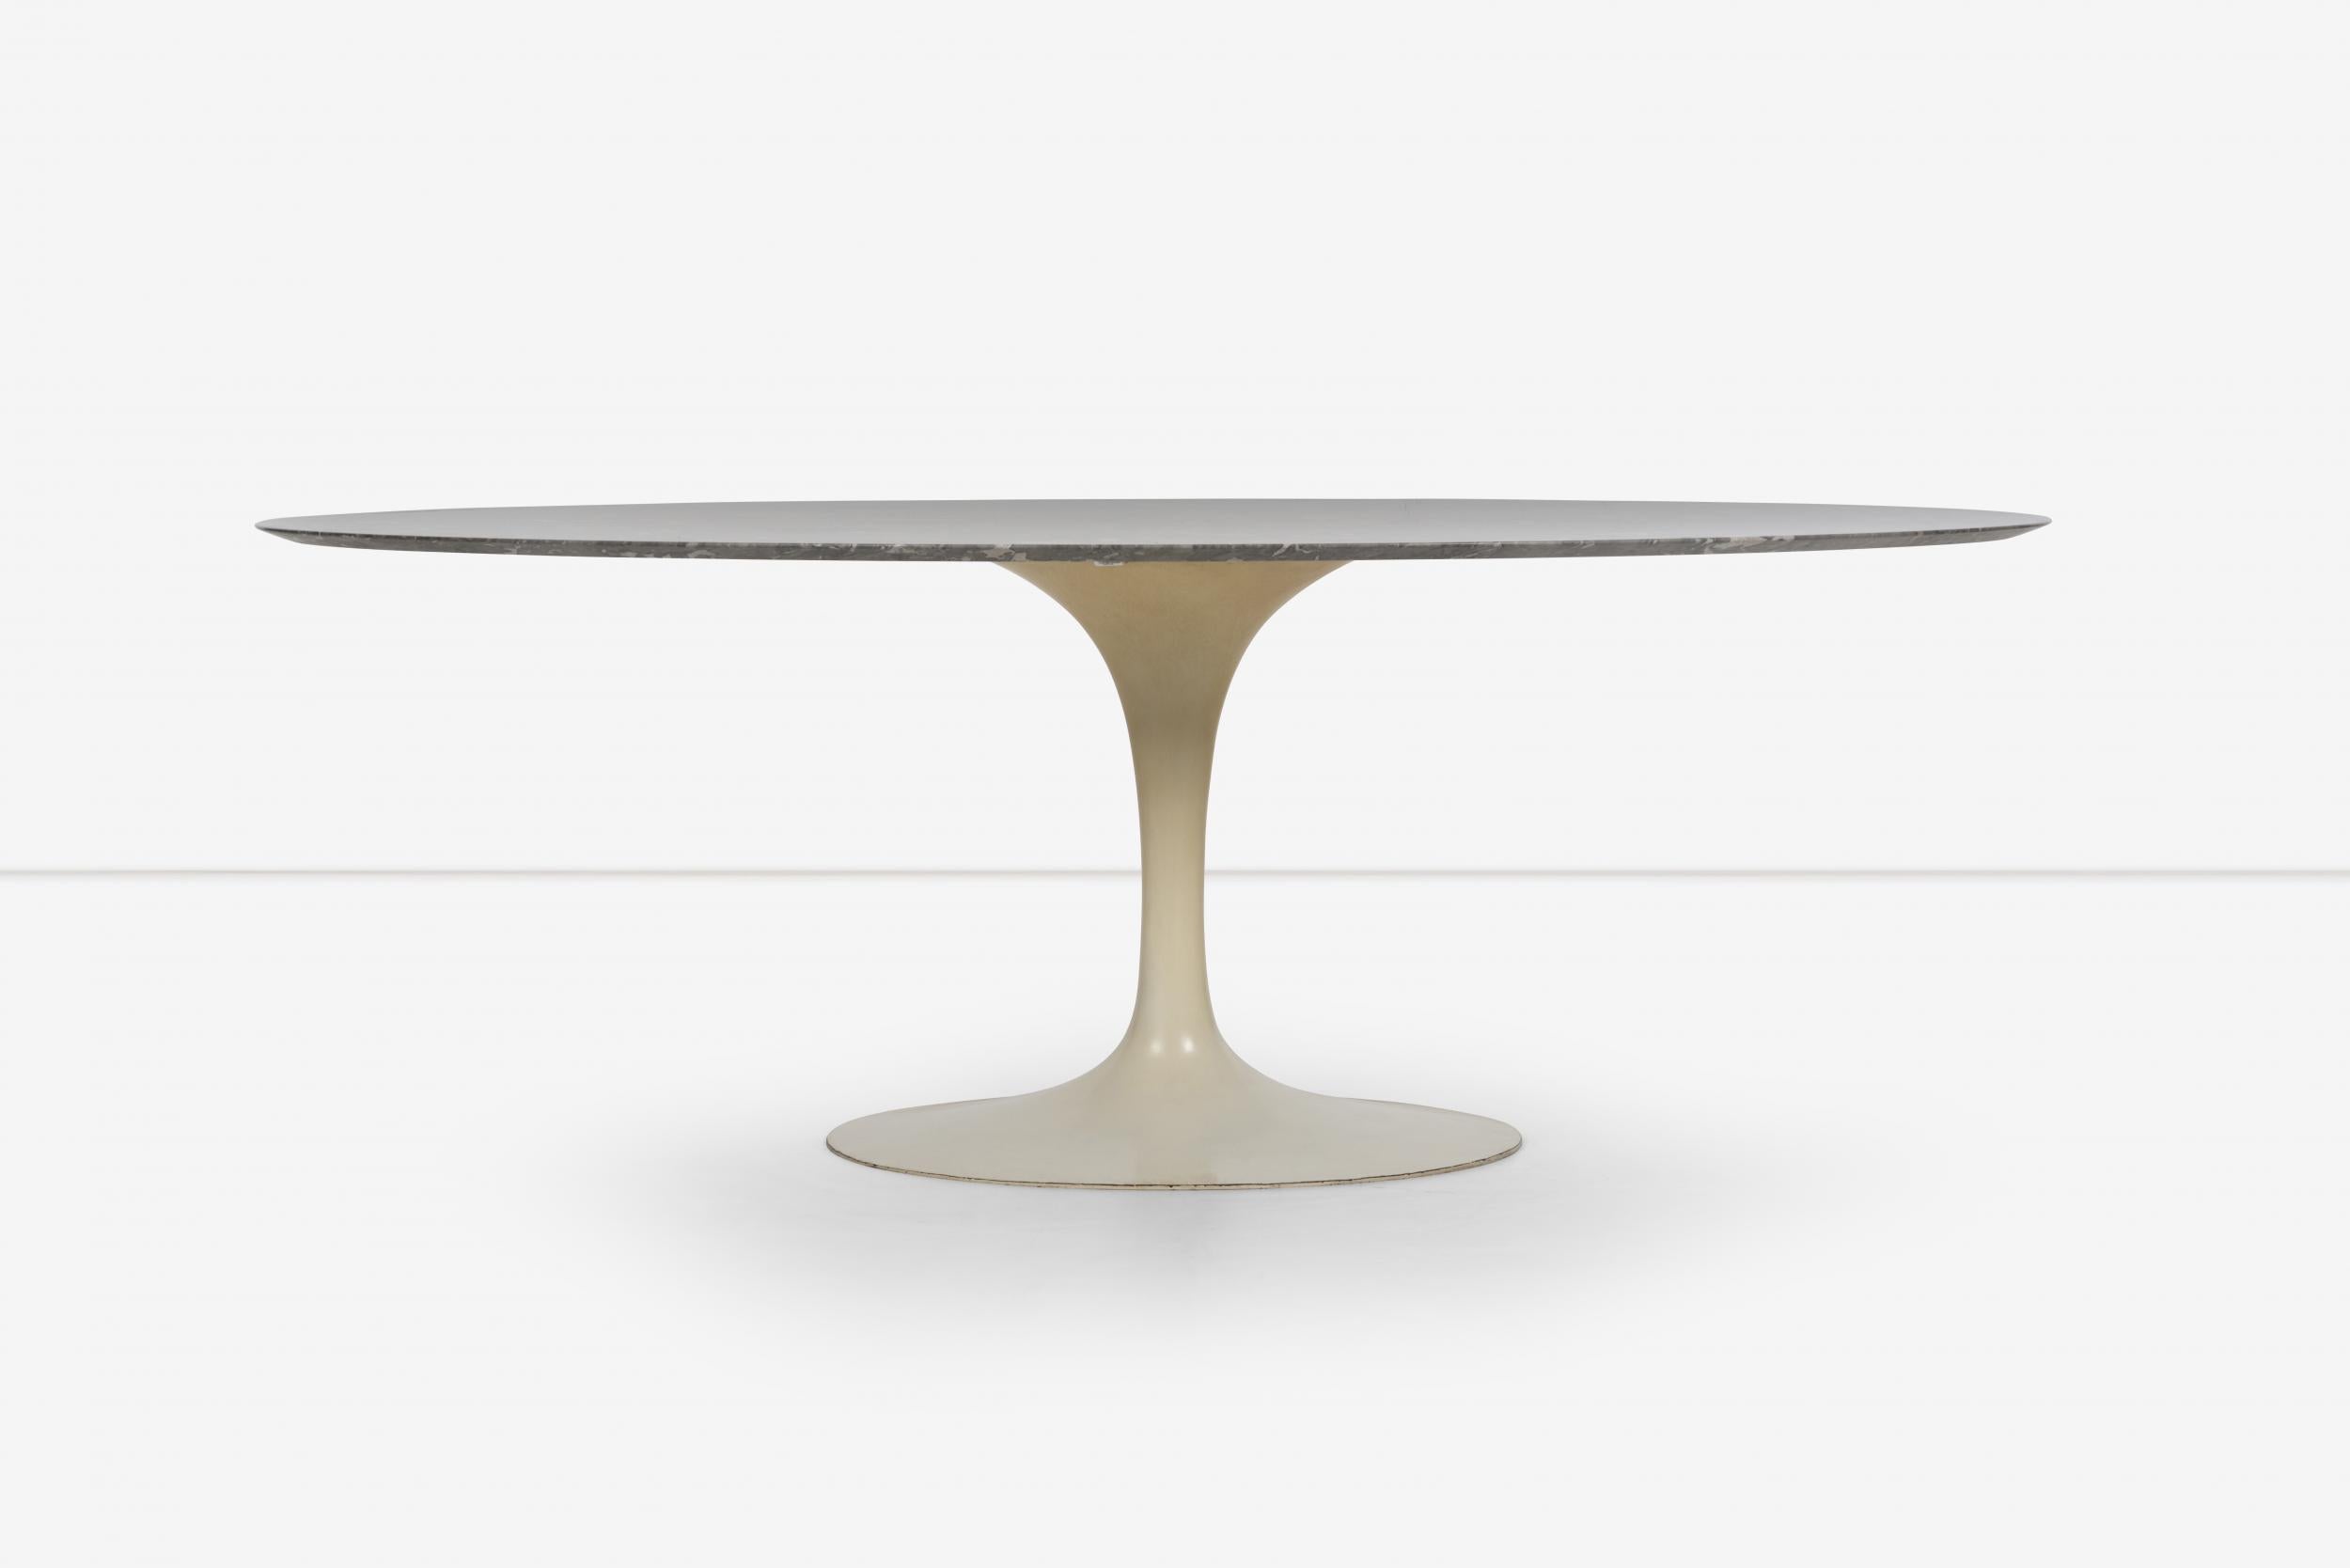 Early Eero Saarinen for Knoll Tulip table cast iron base, marble top dark grey marble with whit veins. 
Base retains Knoll International label underside.